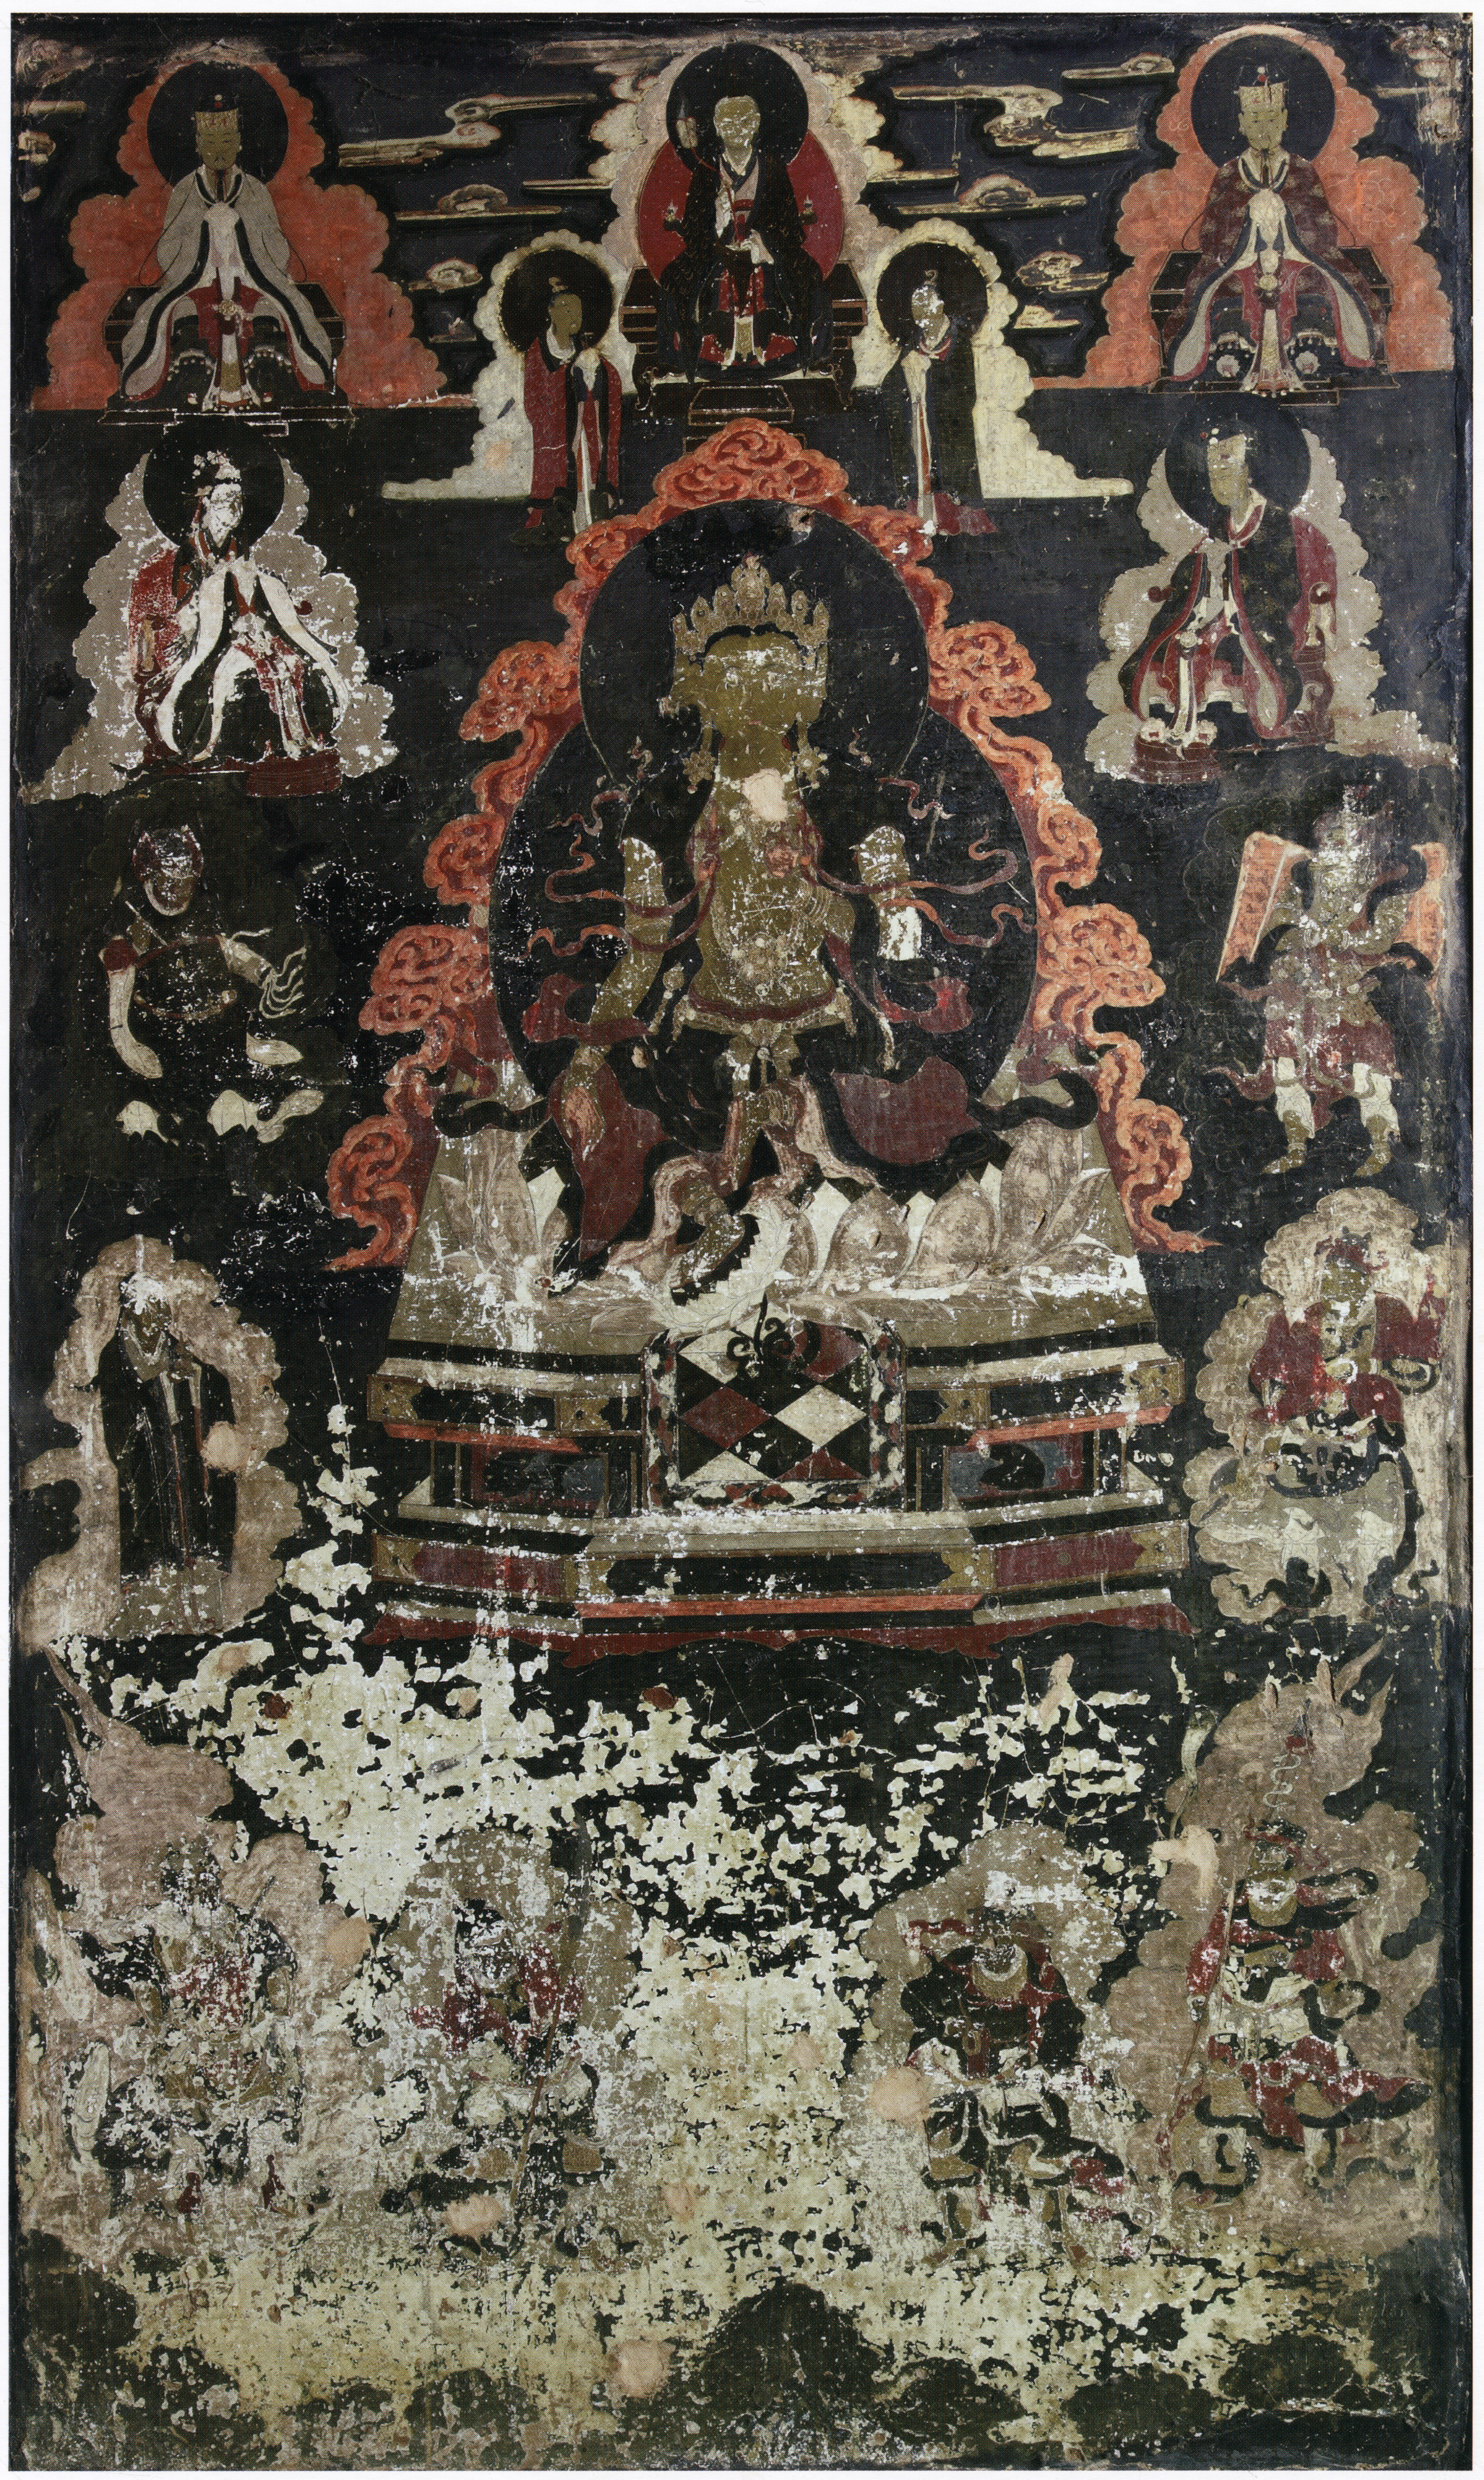 Mural depicting seated Sage surrounded by portraits amidst clouds against black background